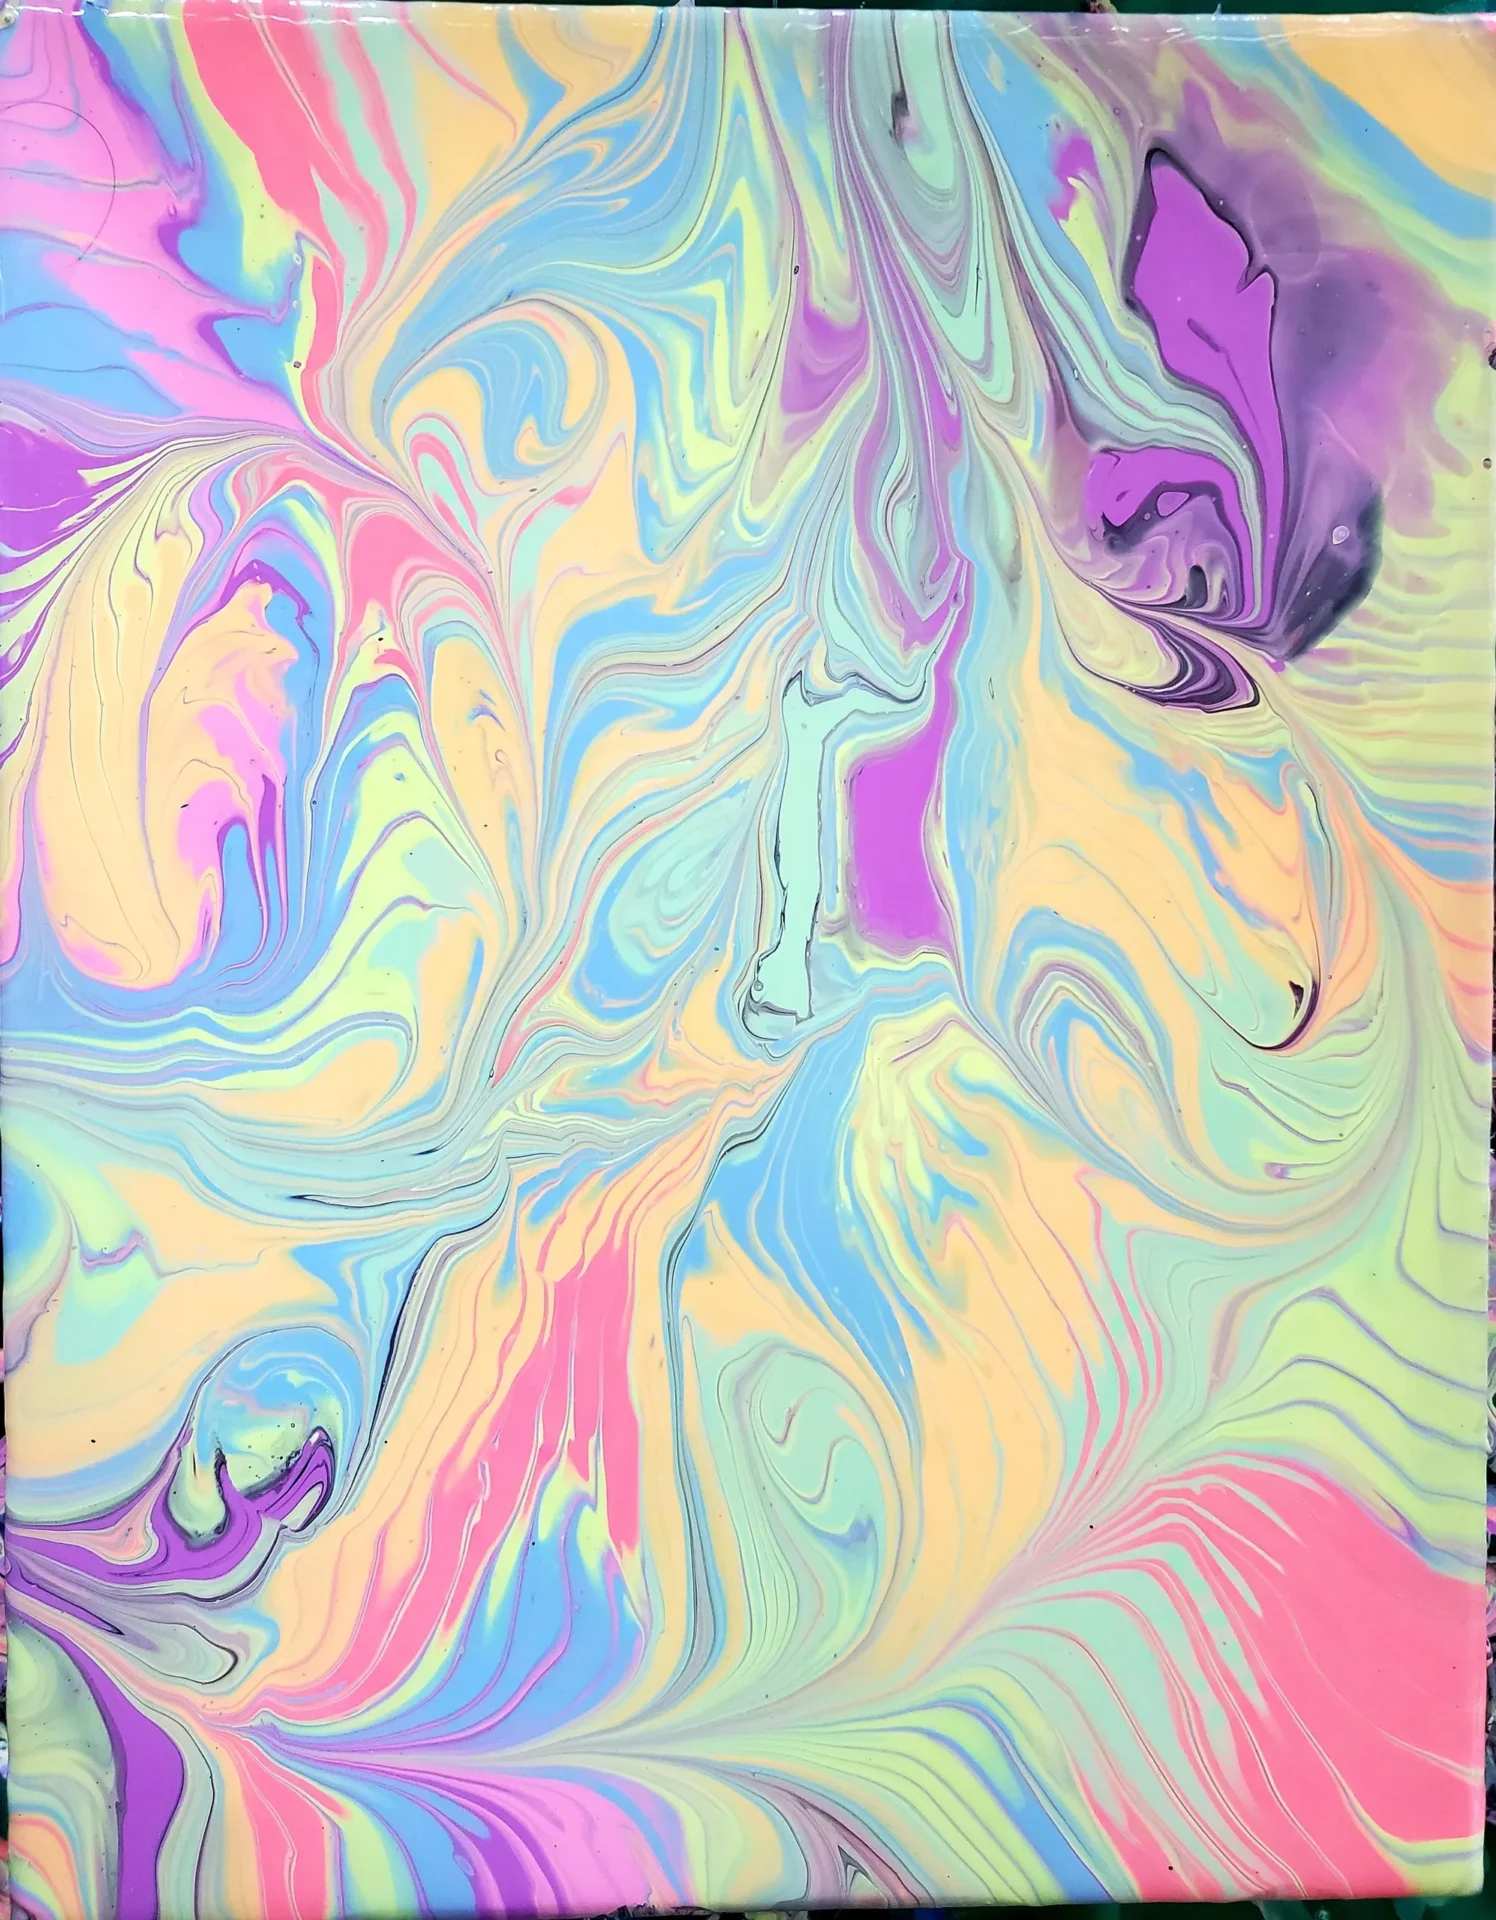 A painting of swirling colors in pastel shades.